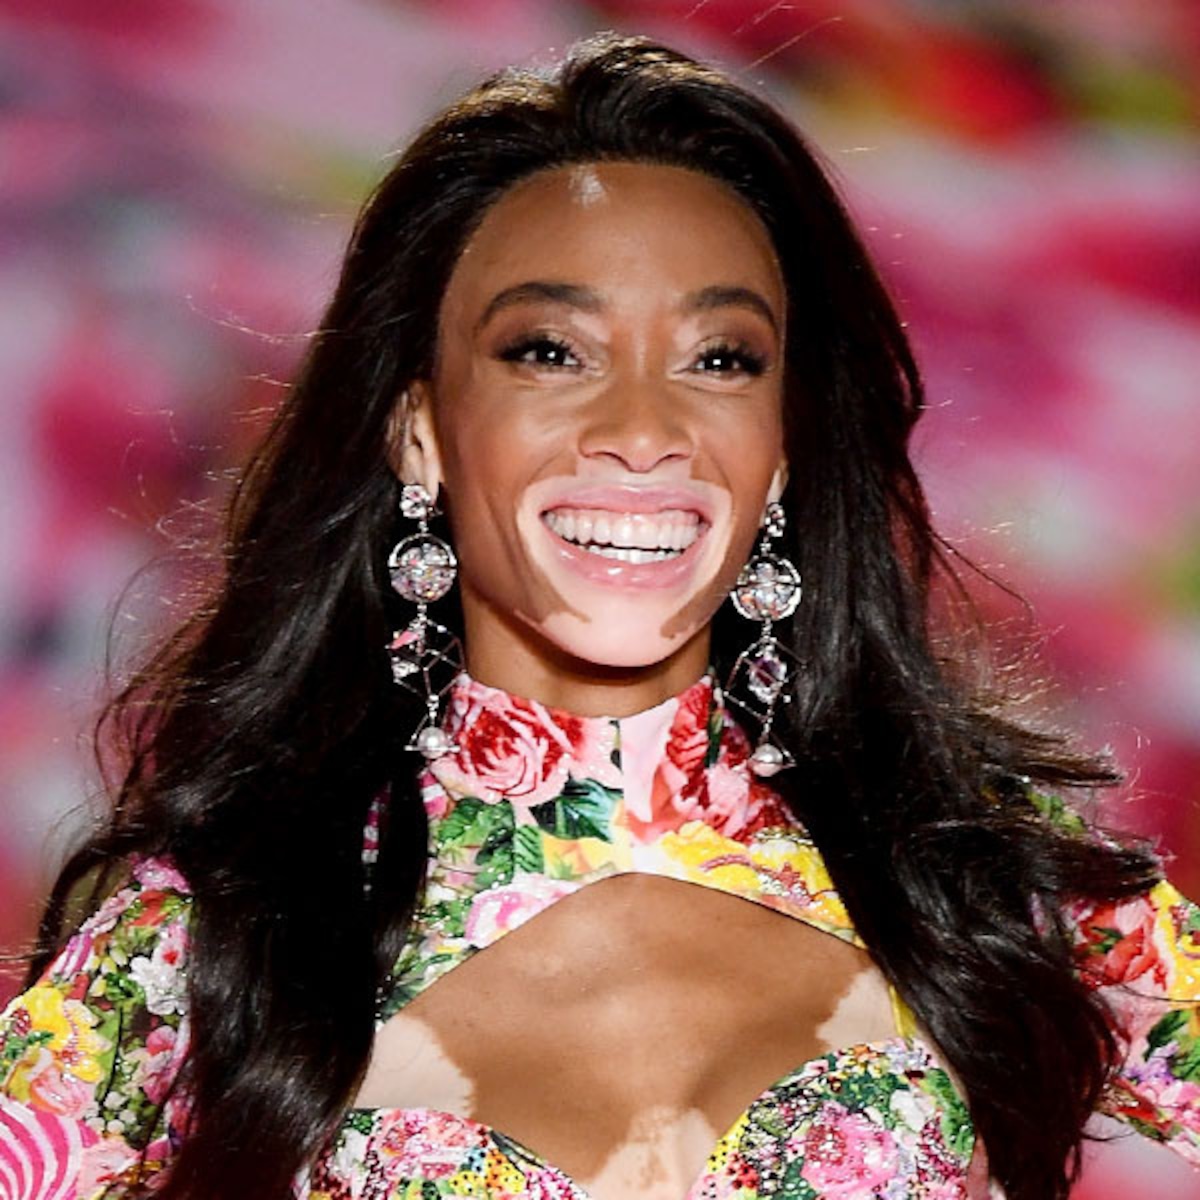 Victoria's Secret gets ready for a makeover